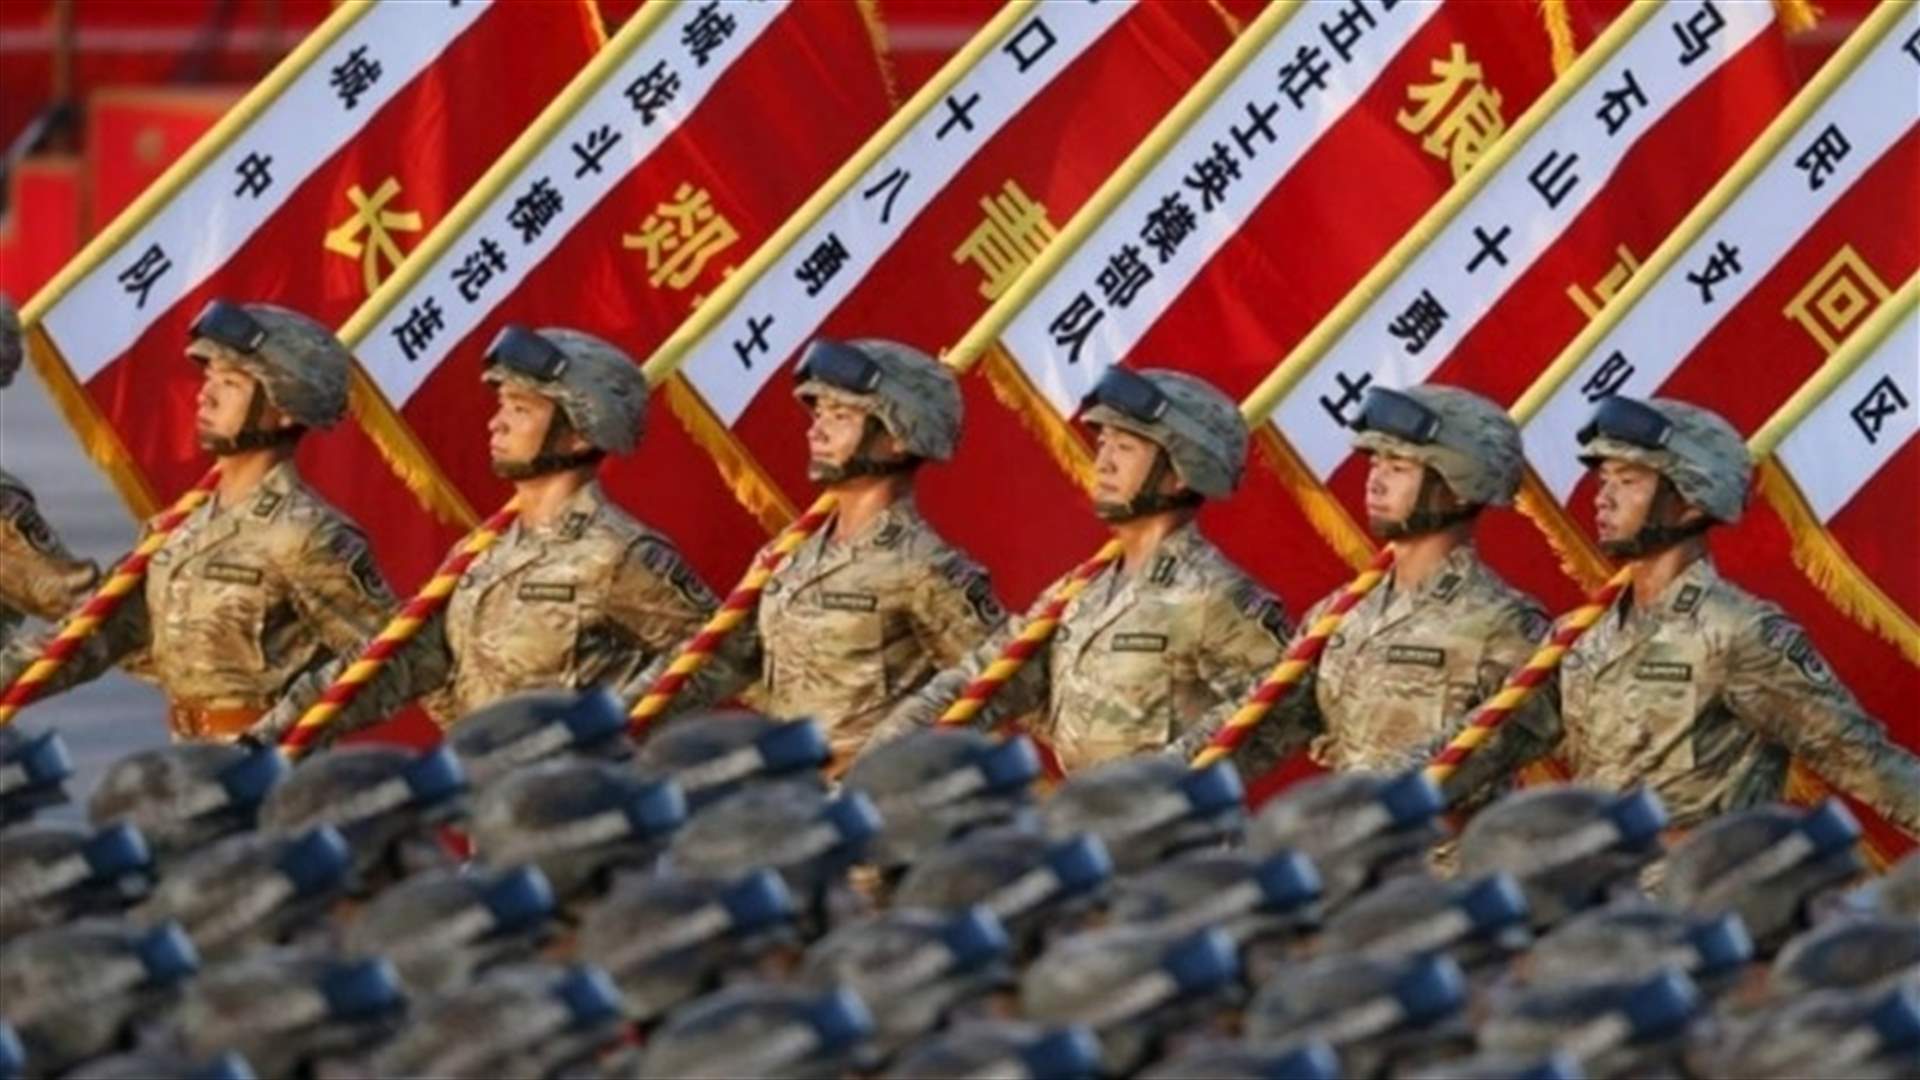 China military says it is providing medical training for Syria